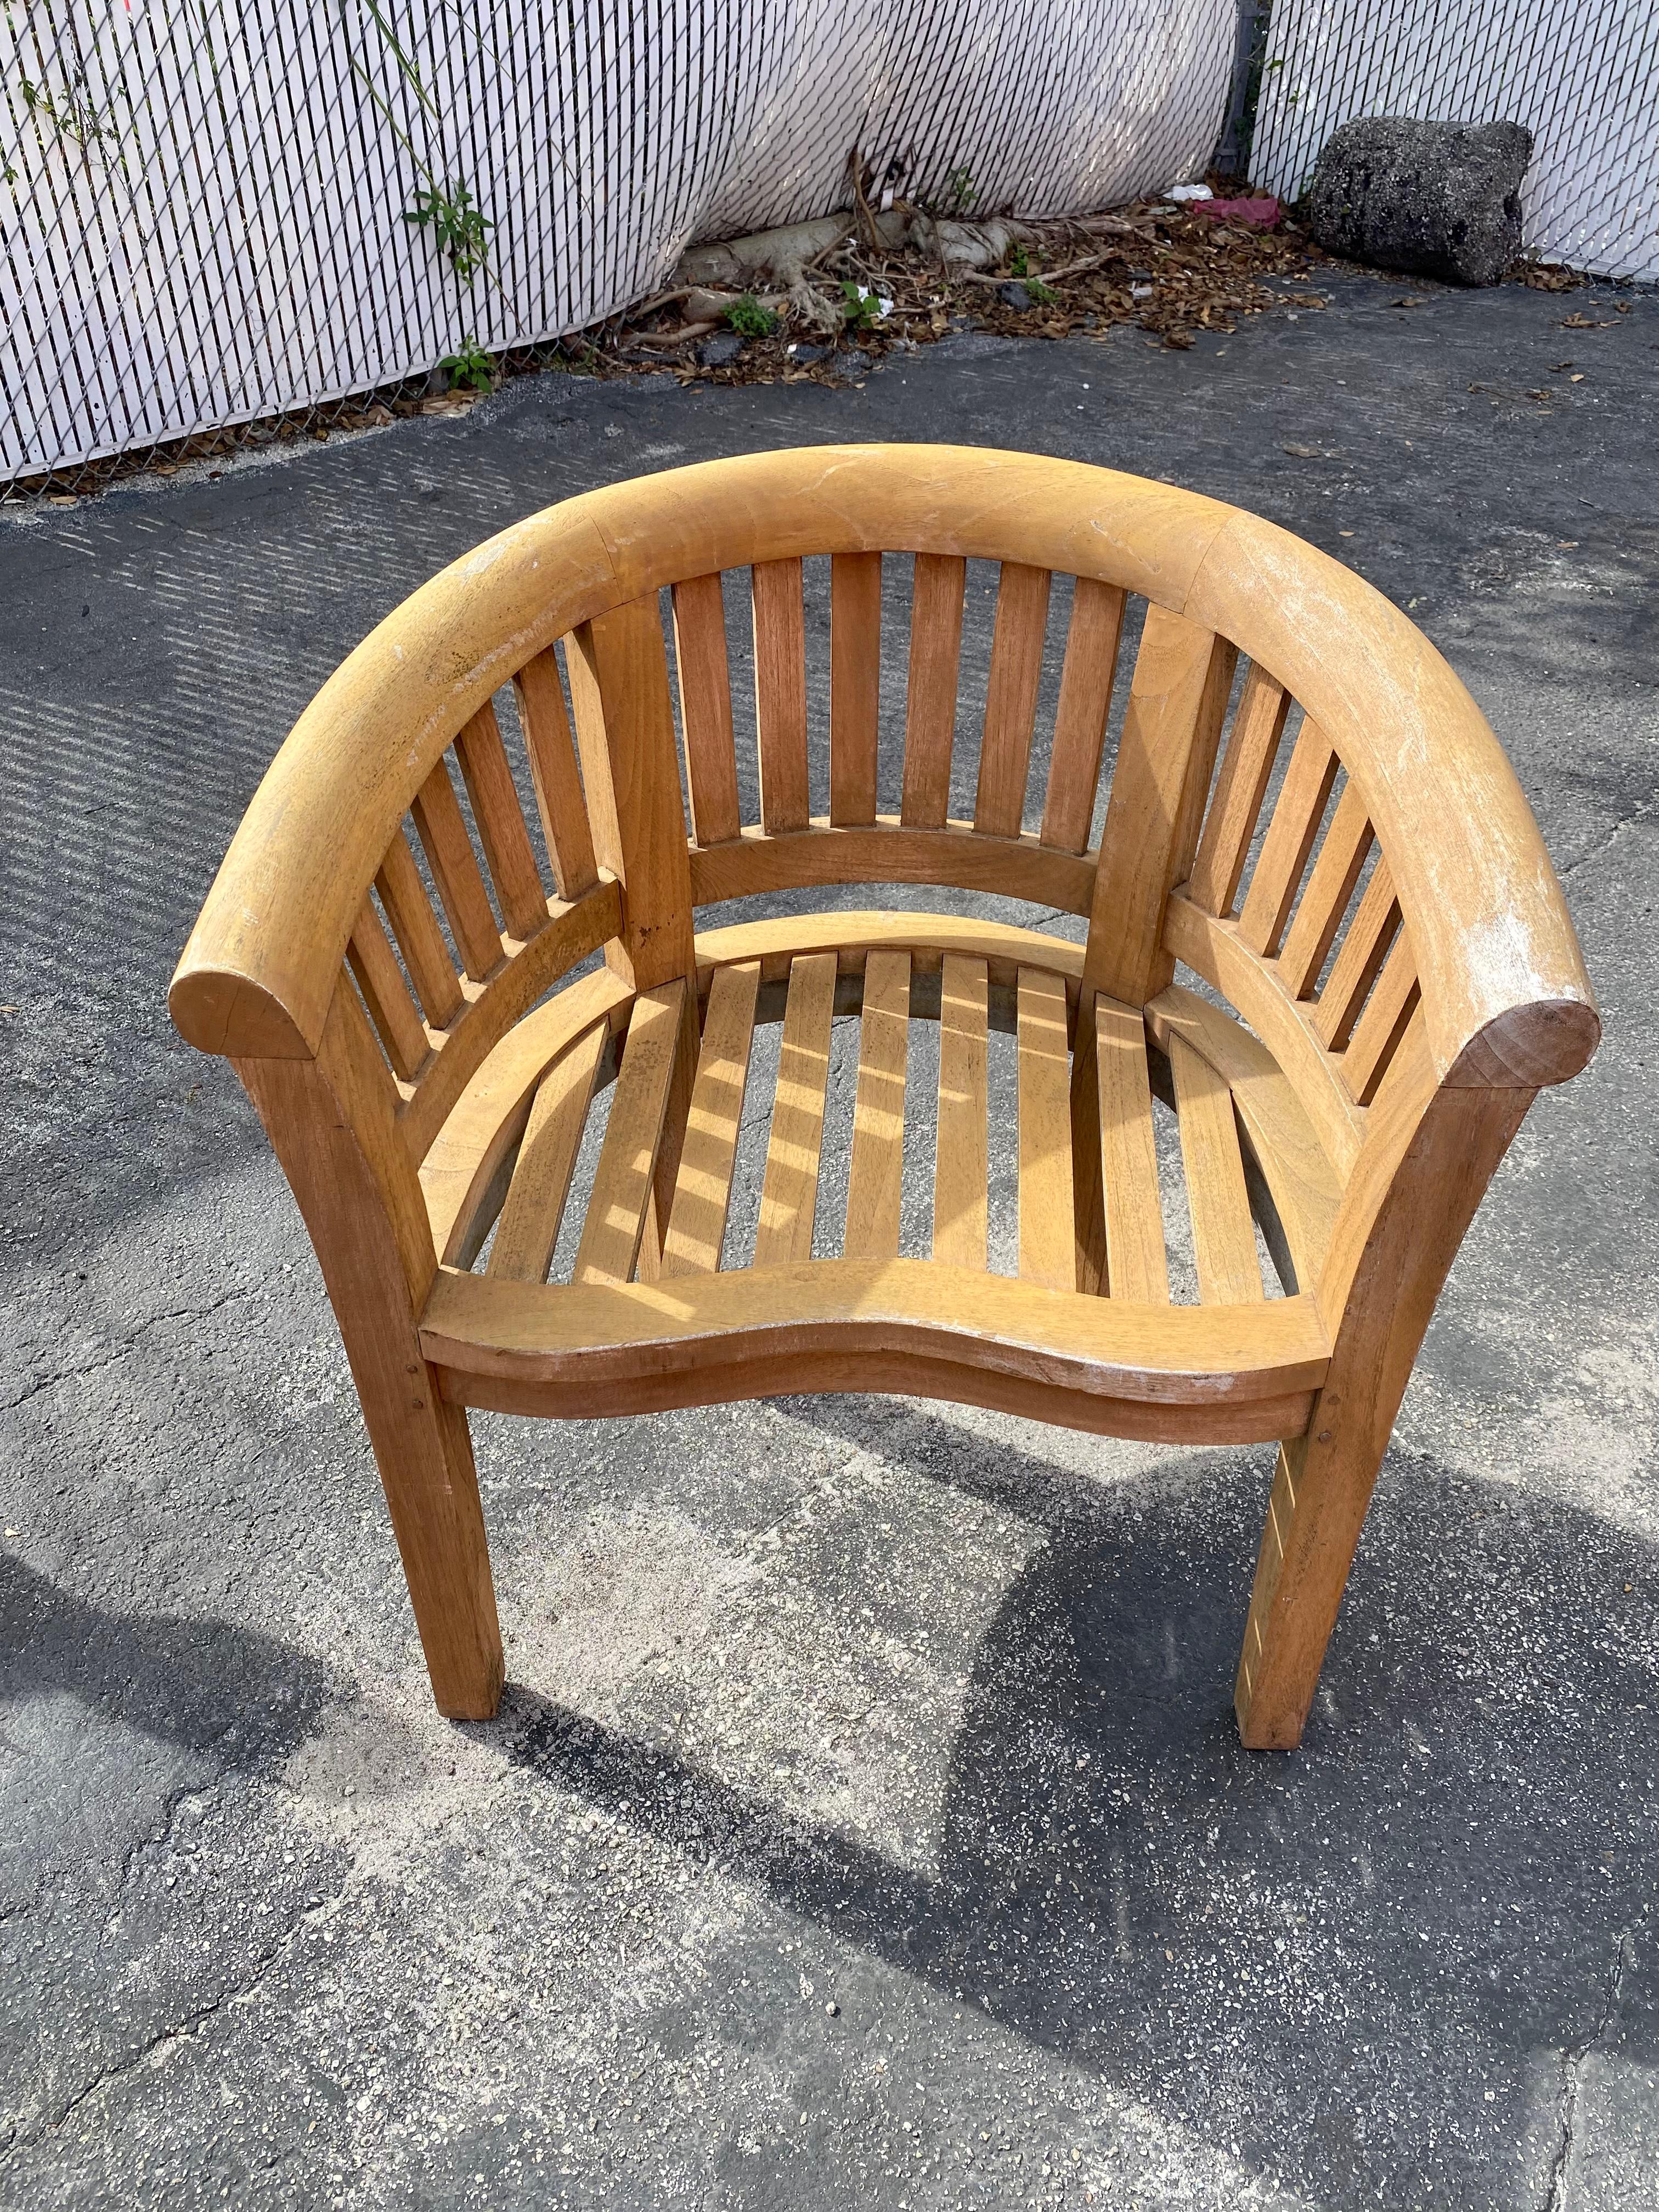 1970s Teak Curved Barrel Kidney Slatted Settee Table Chairs, Set of 4 For Sale 5